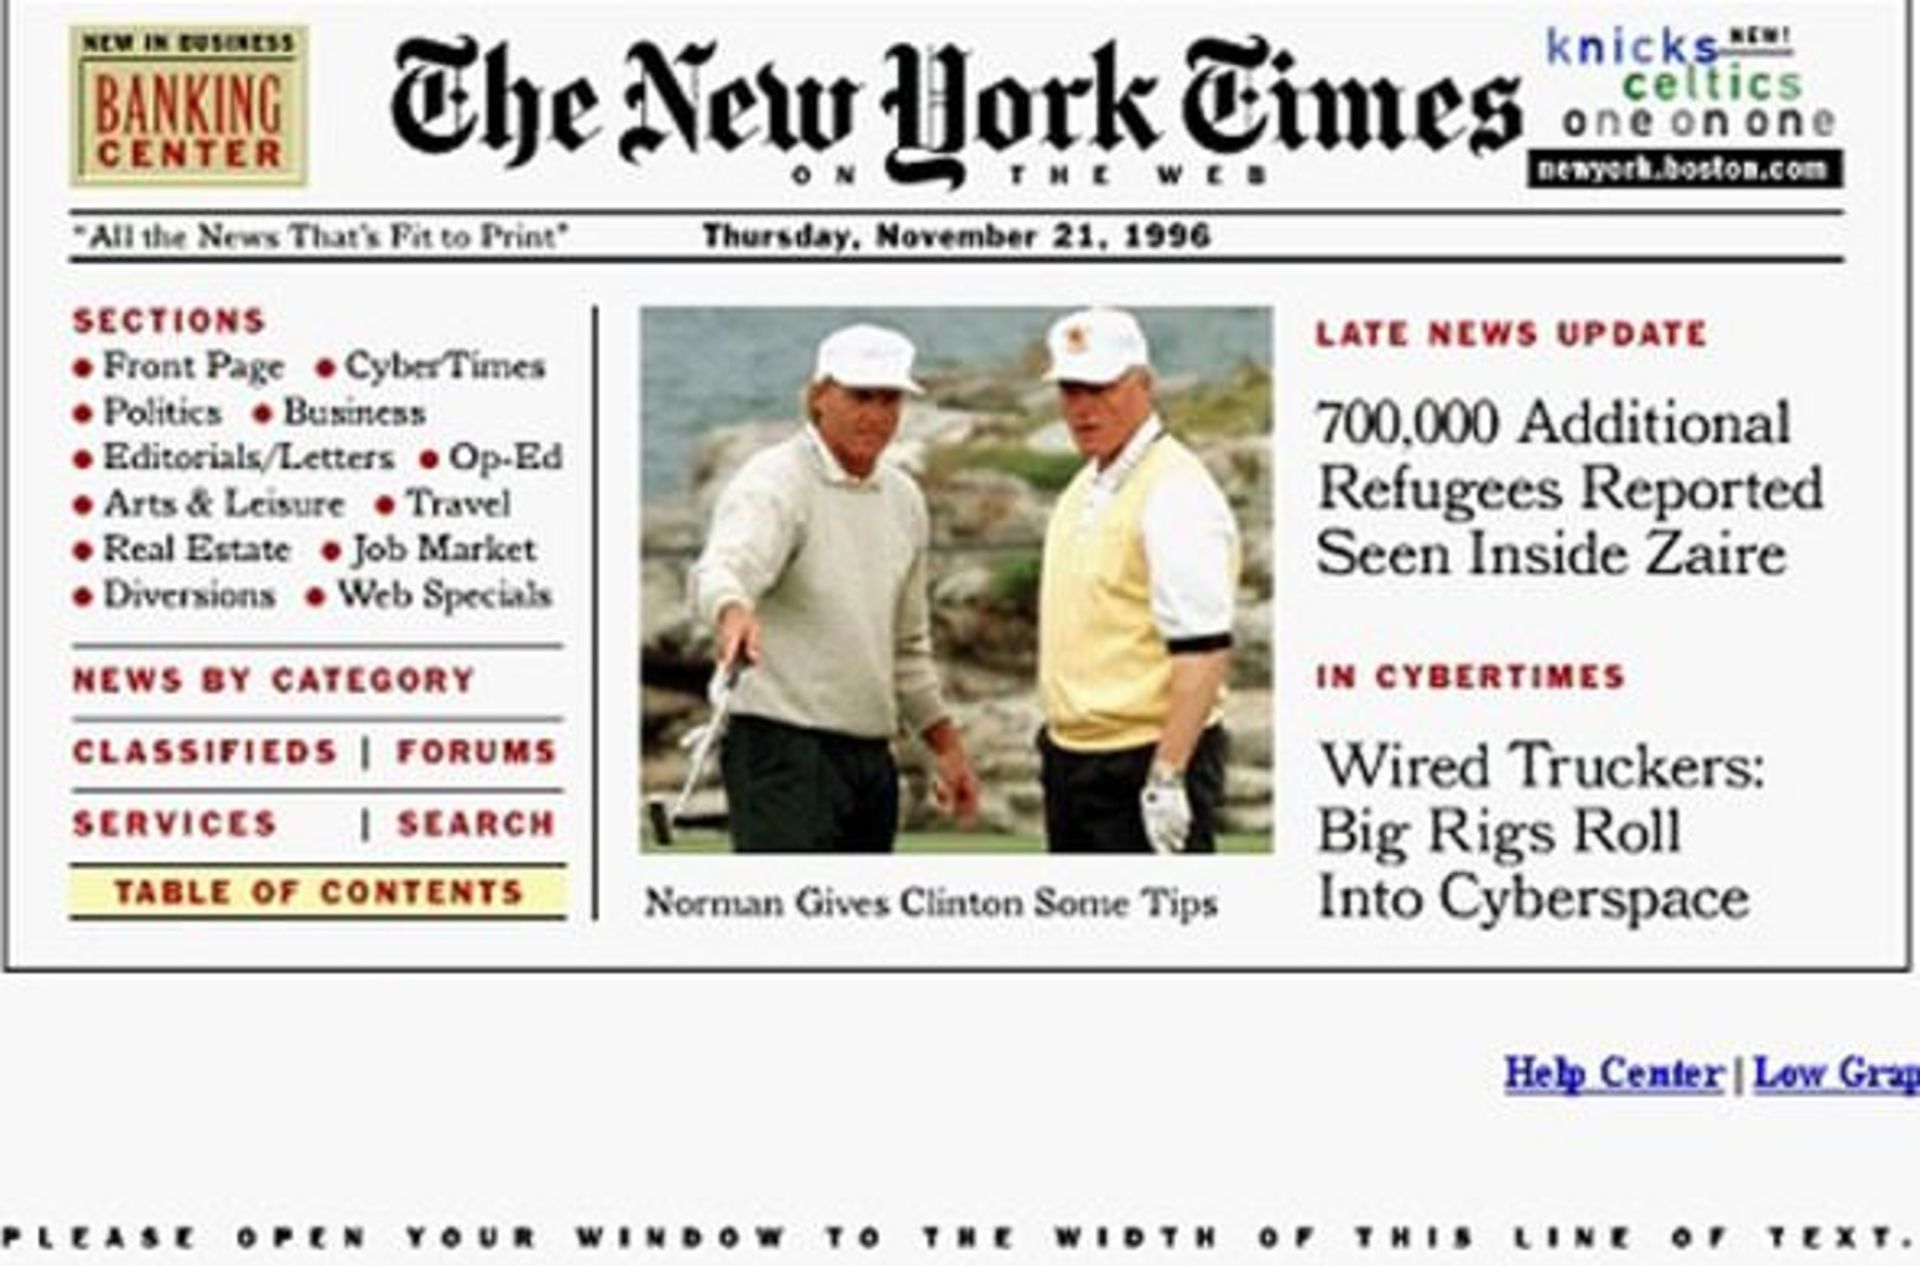 the-new-york-times-then-1996